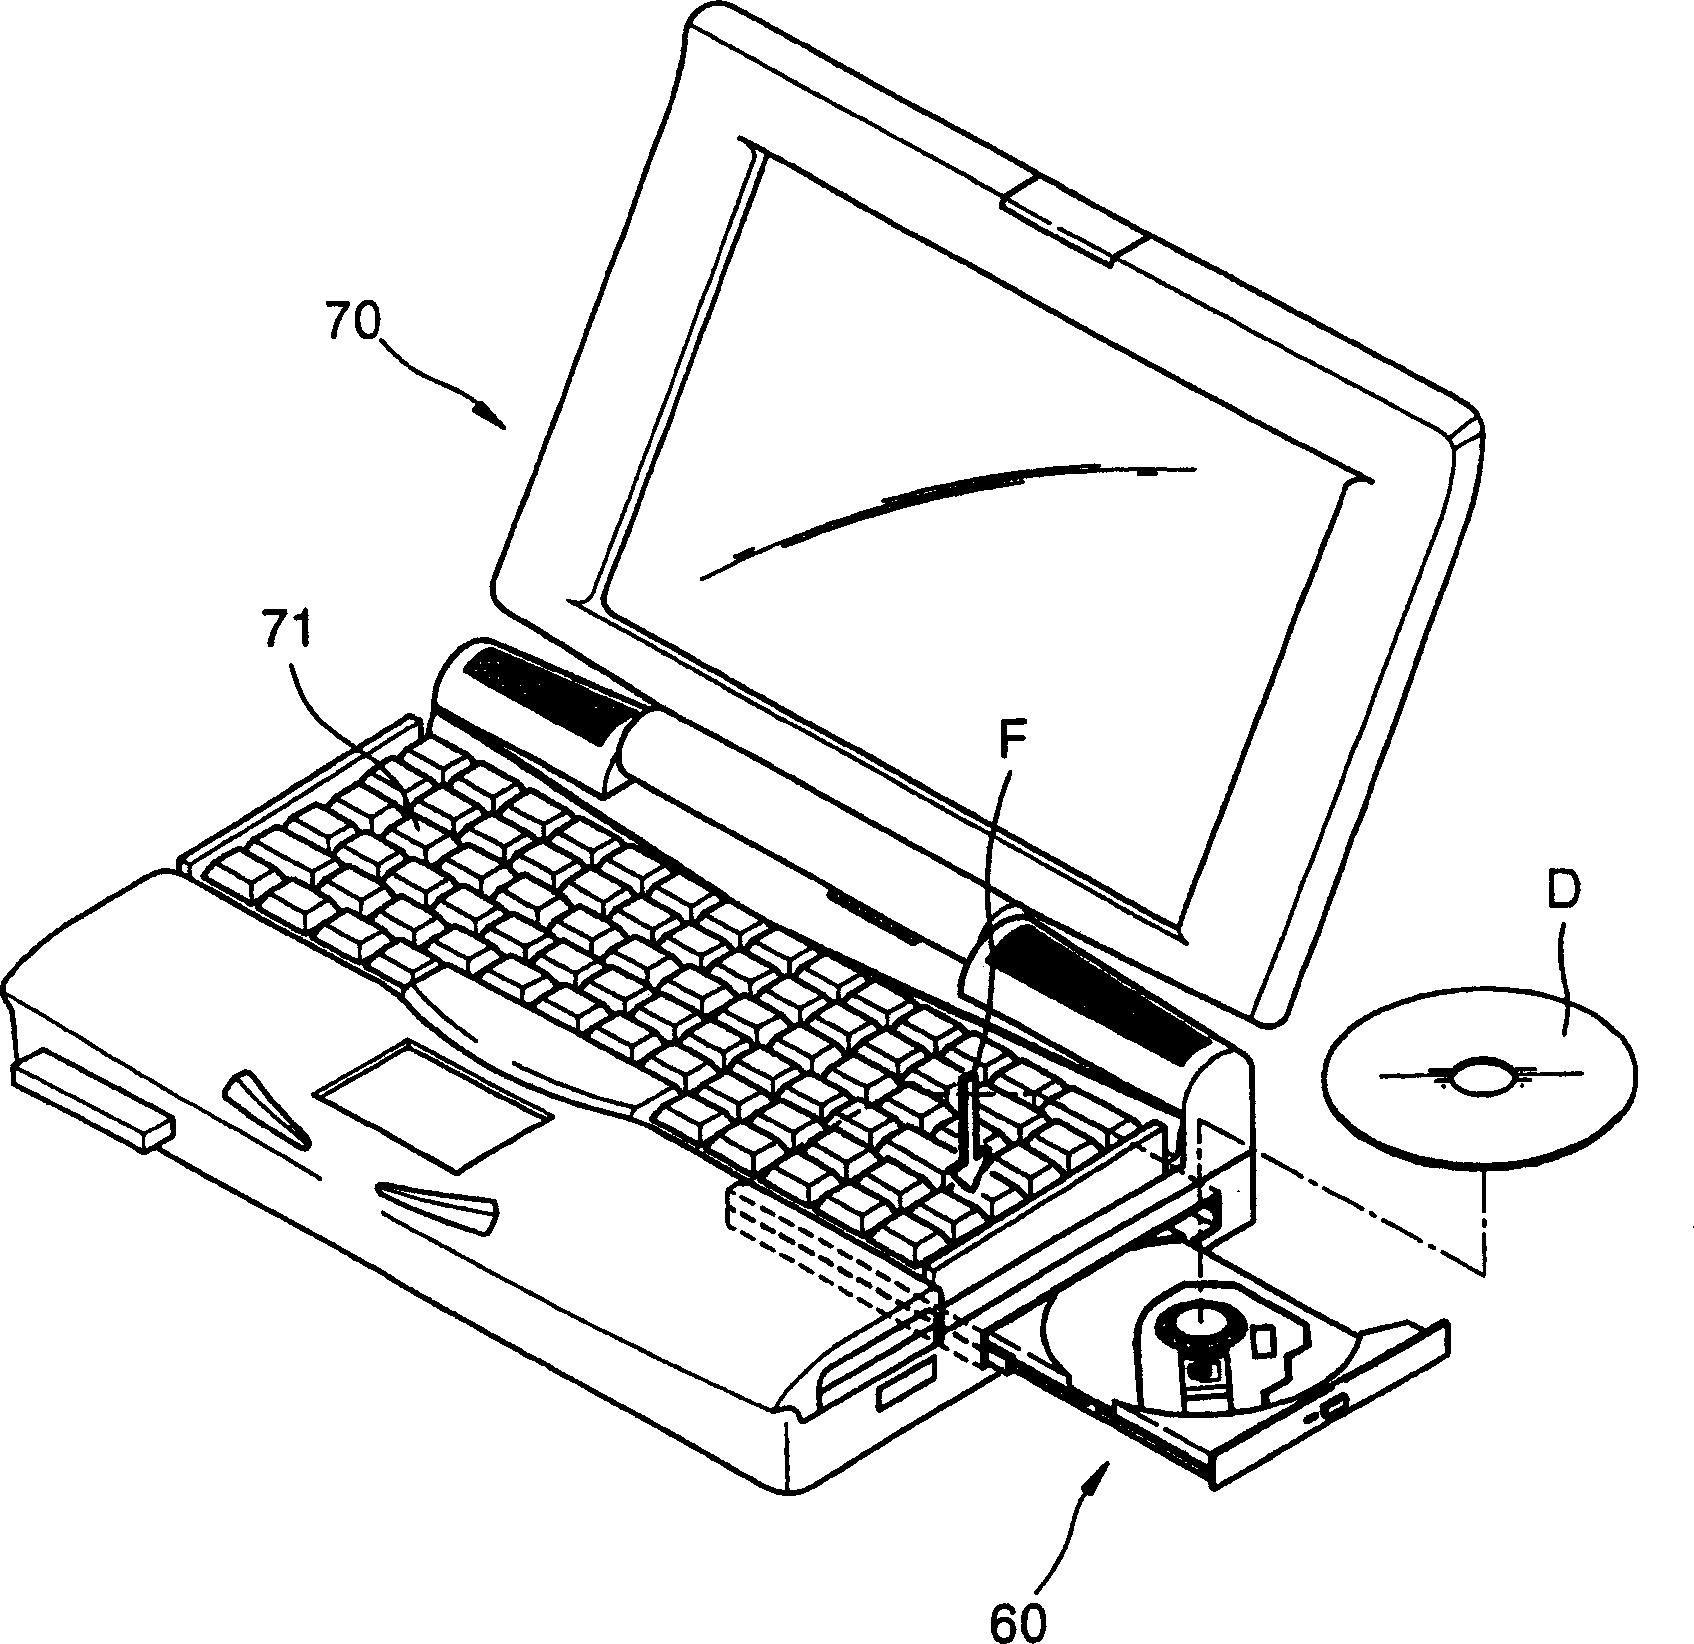 Slim optical disc drive and portable computer with the driver